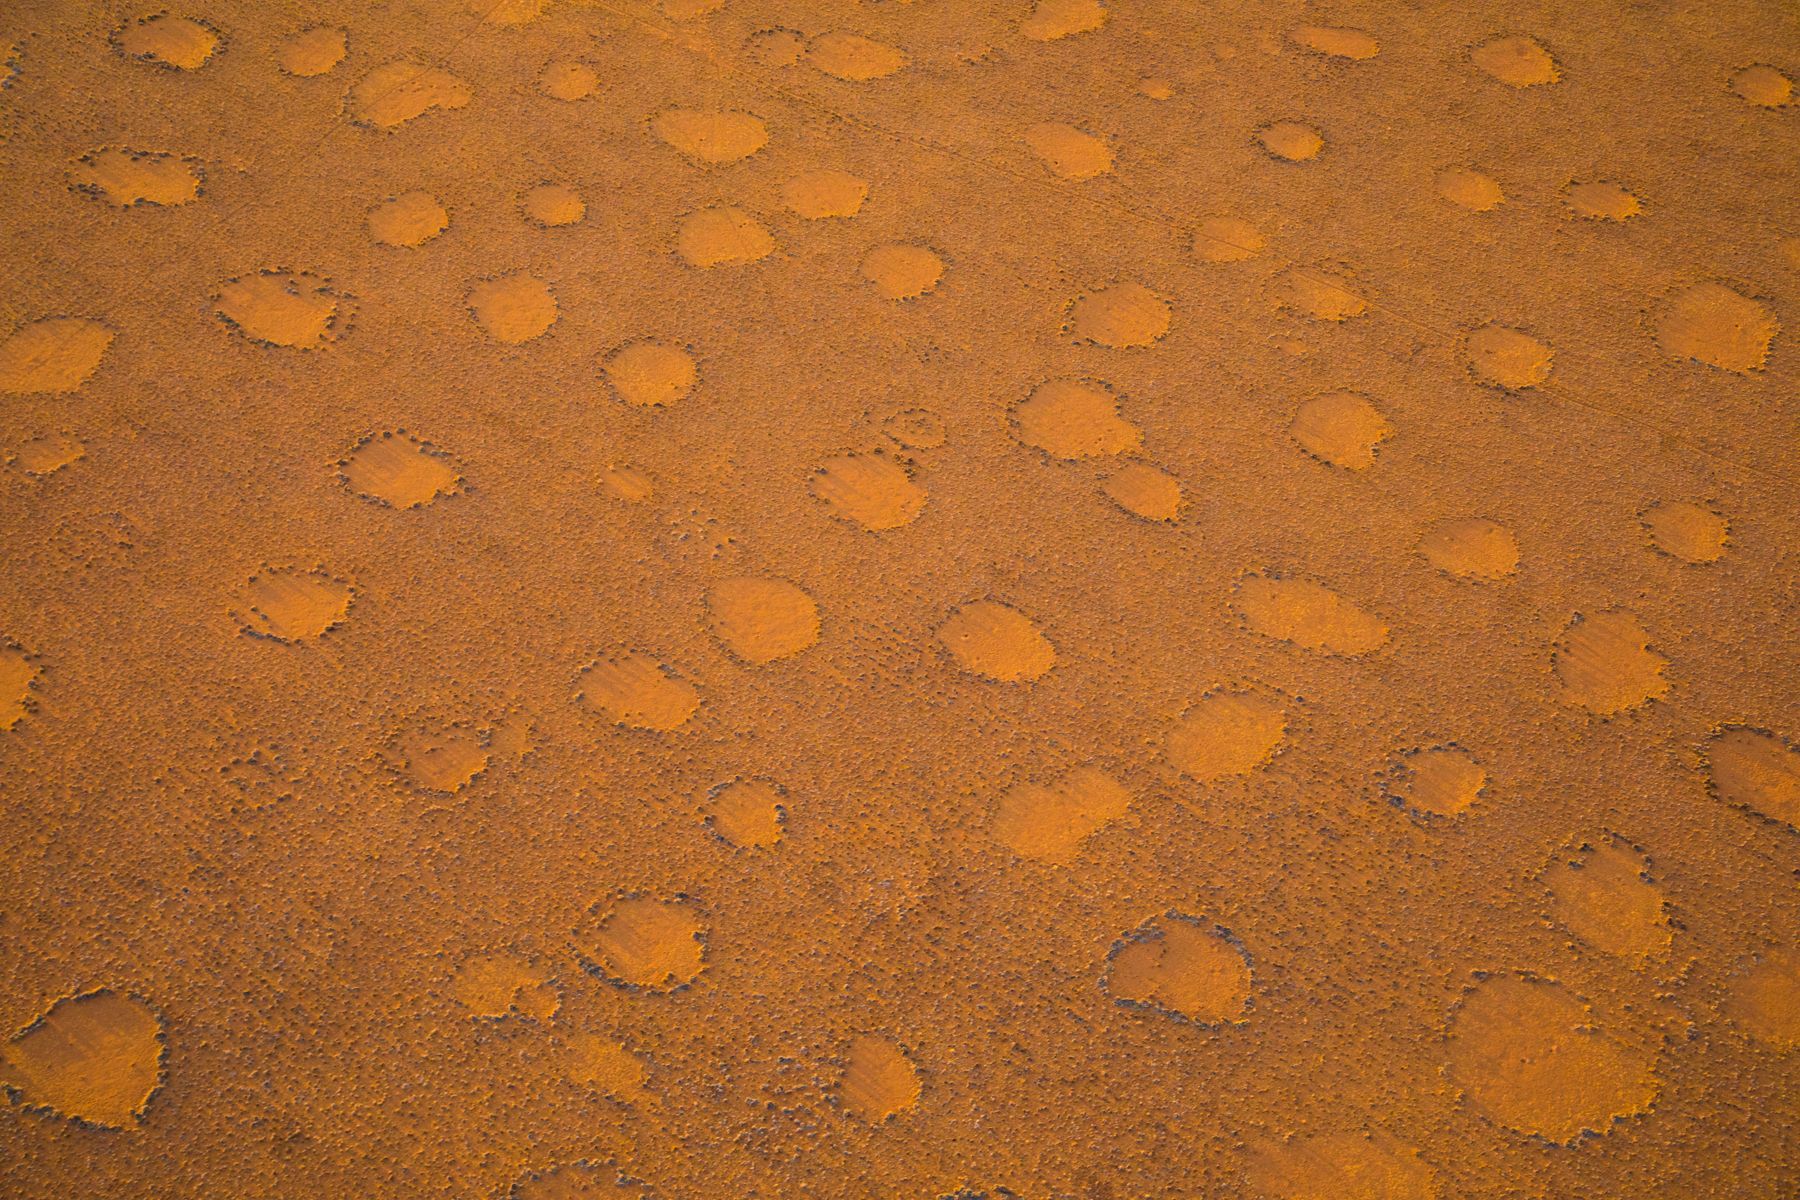 The fairy circles of Namibia during our photography tour